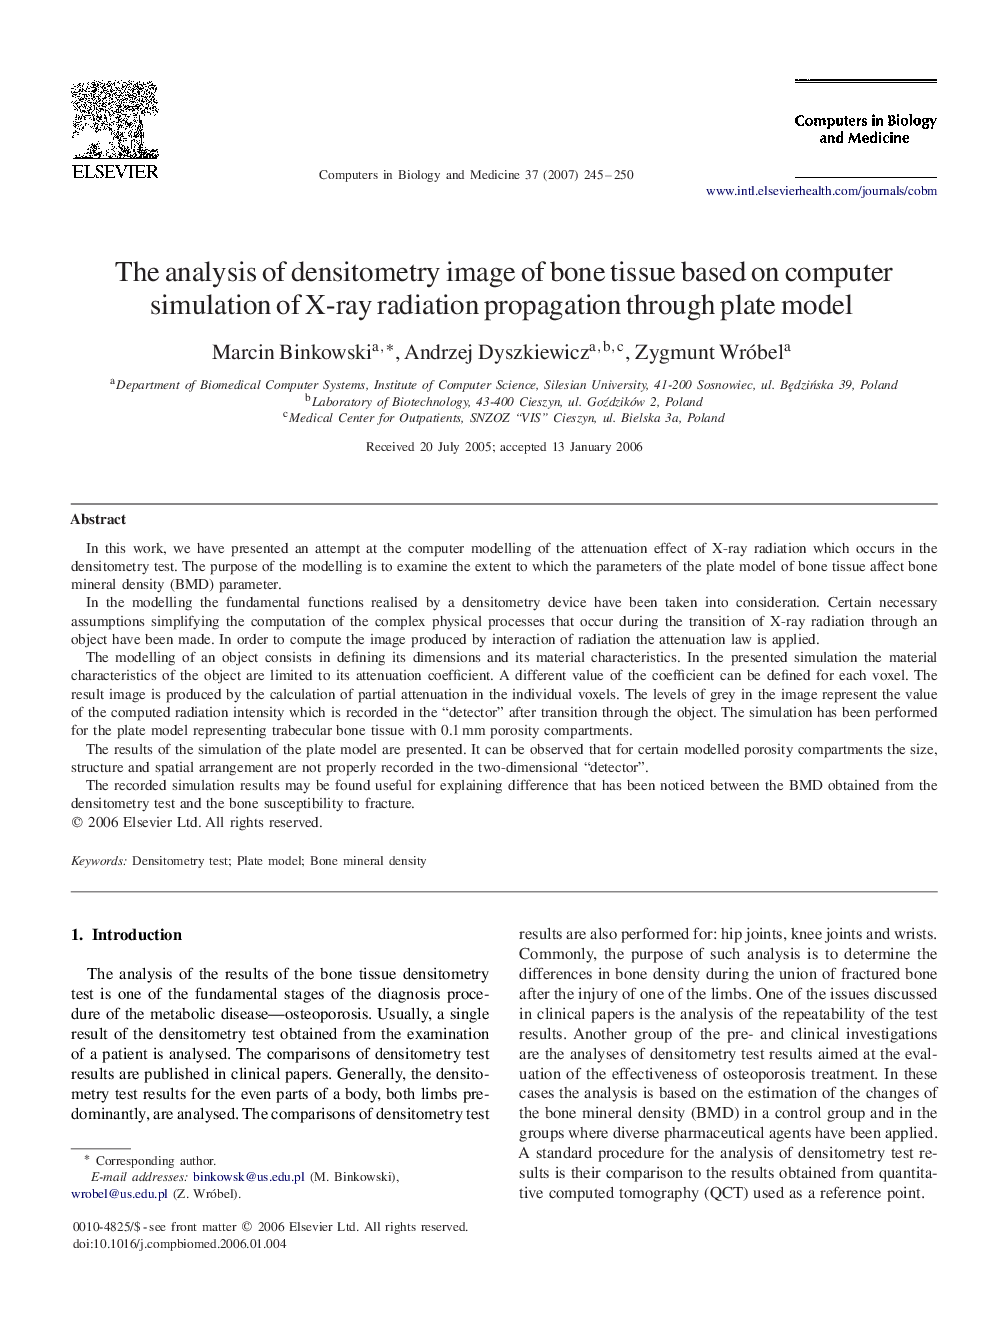 The analysis of densitometry image of bone tissue based on computer simulation of X-ray radiation propagation through plate model